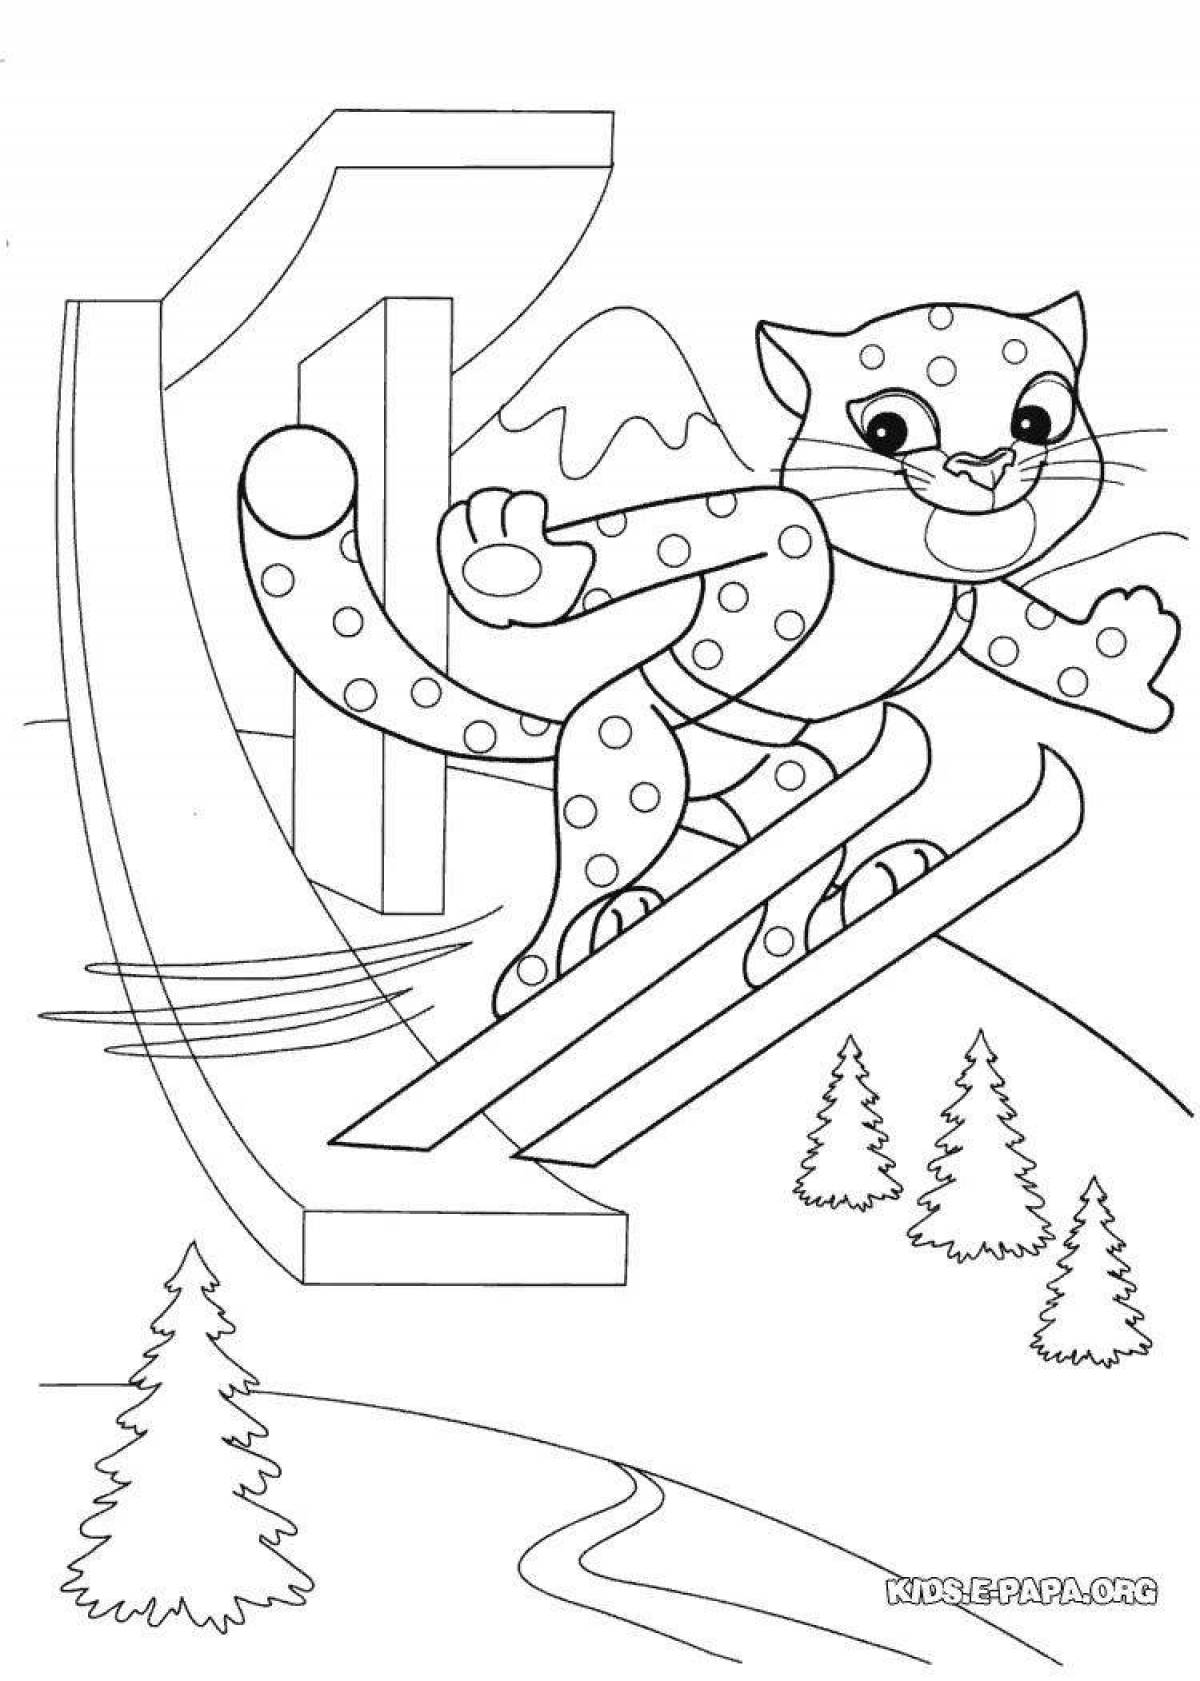 Charming winter olympics coloring book